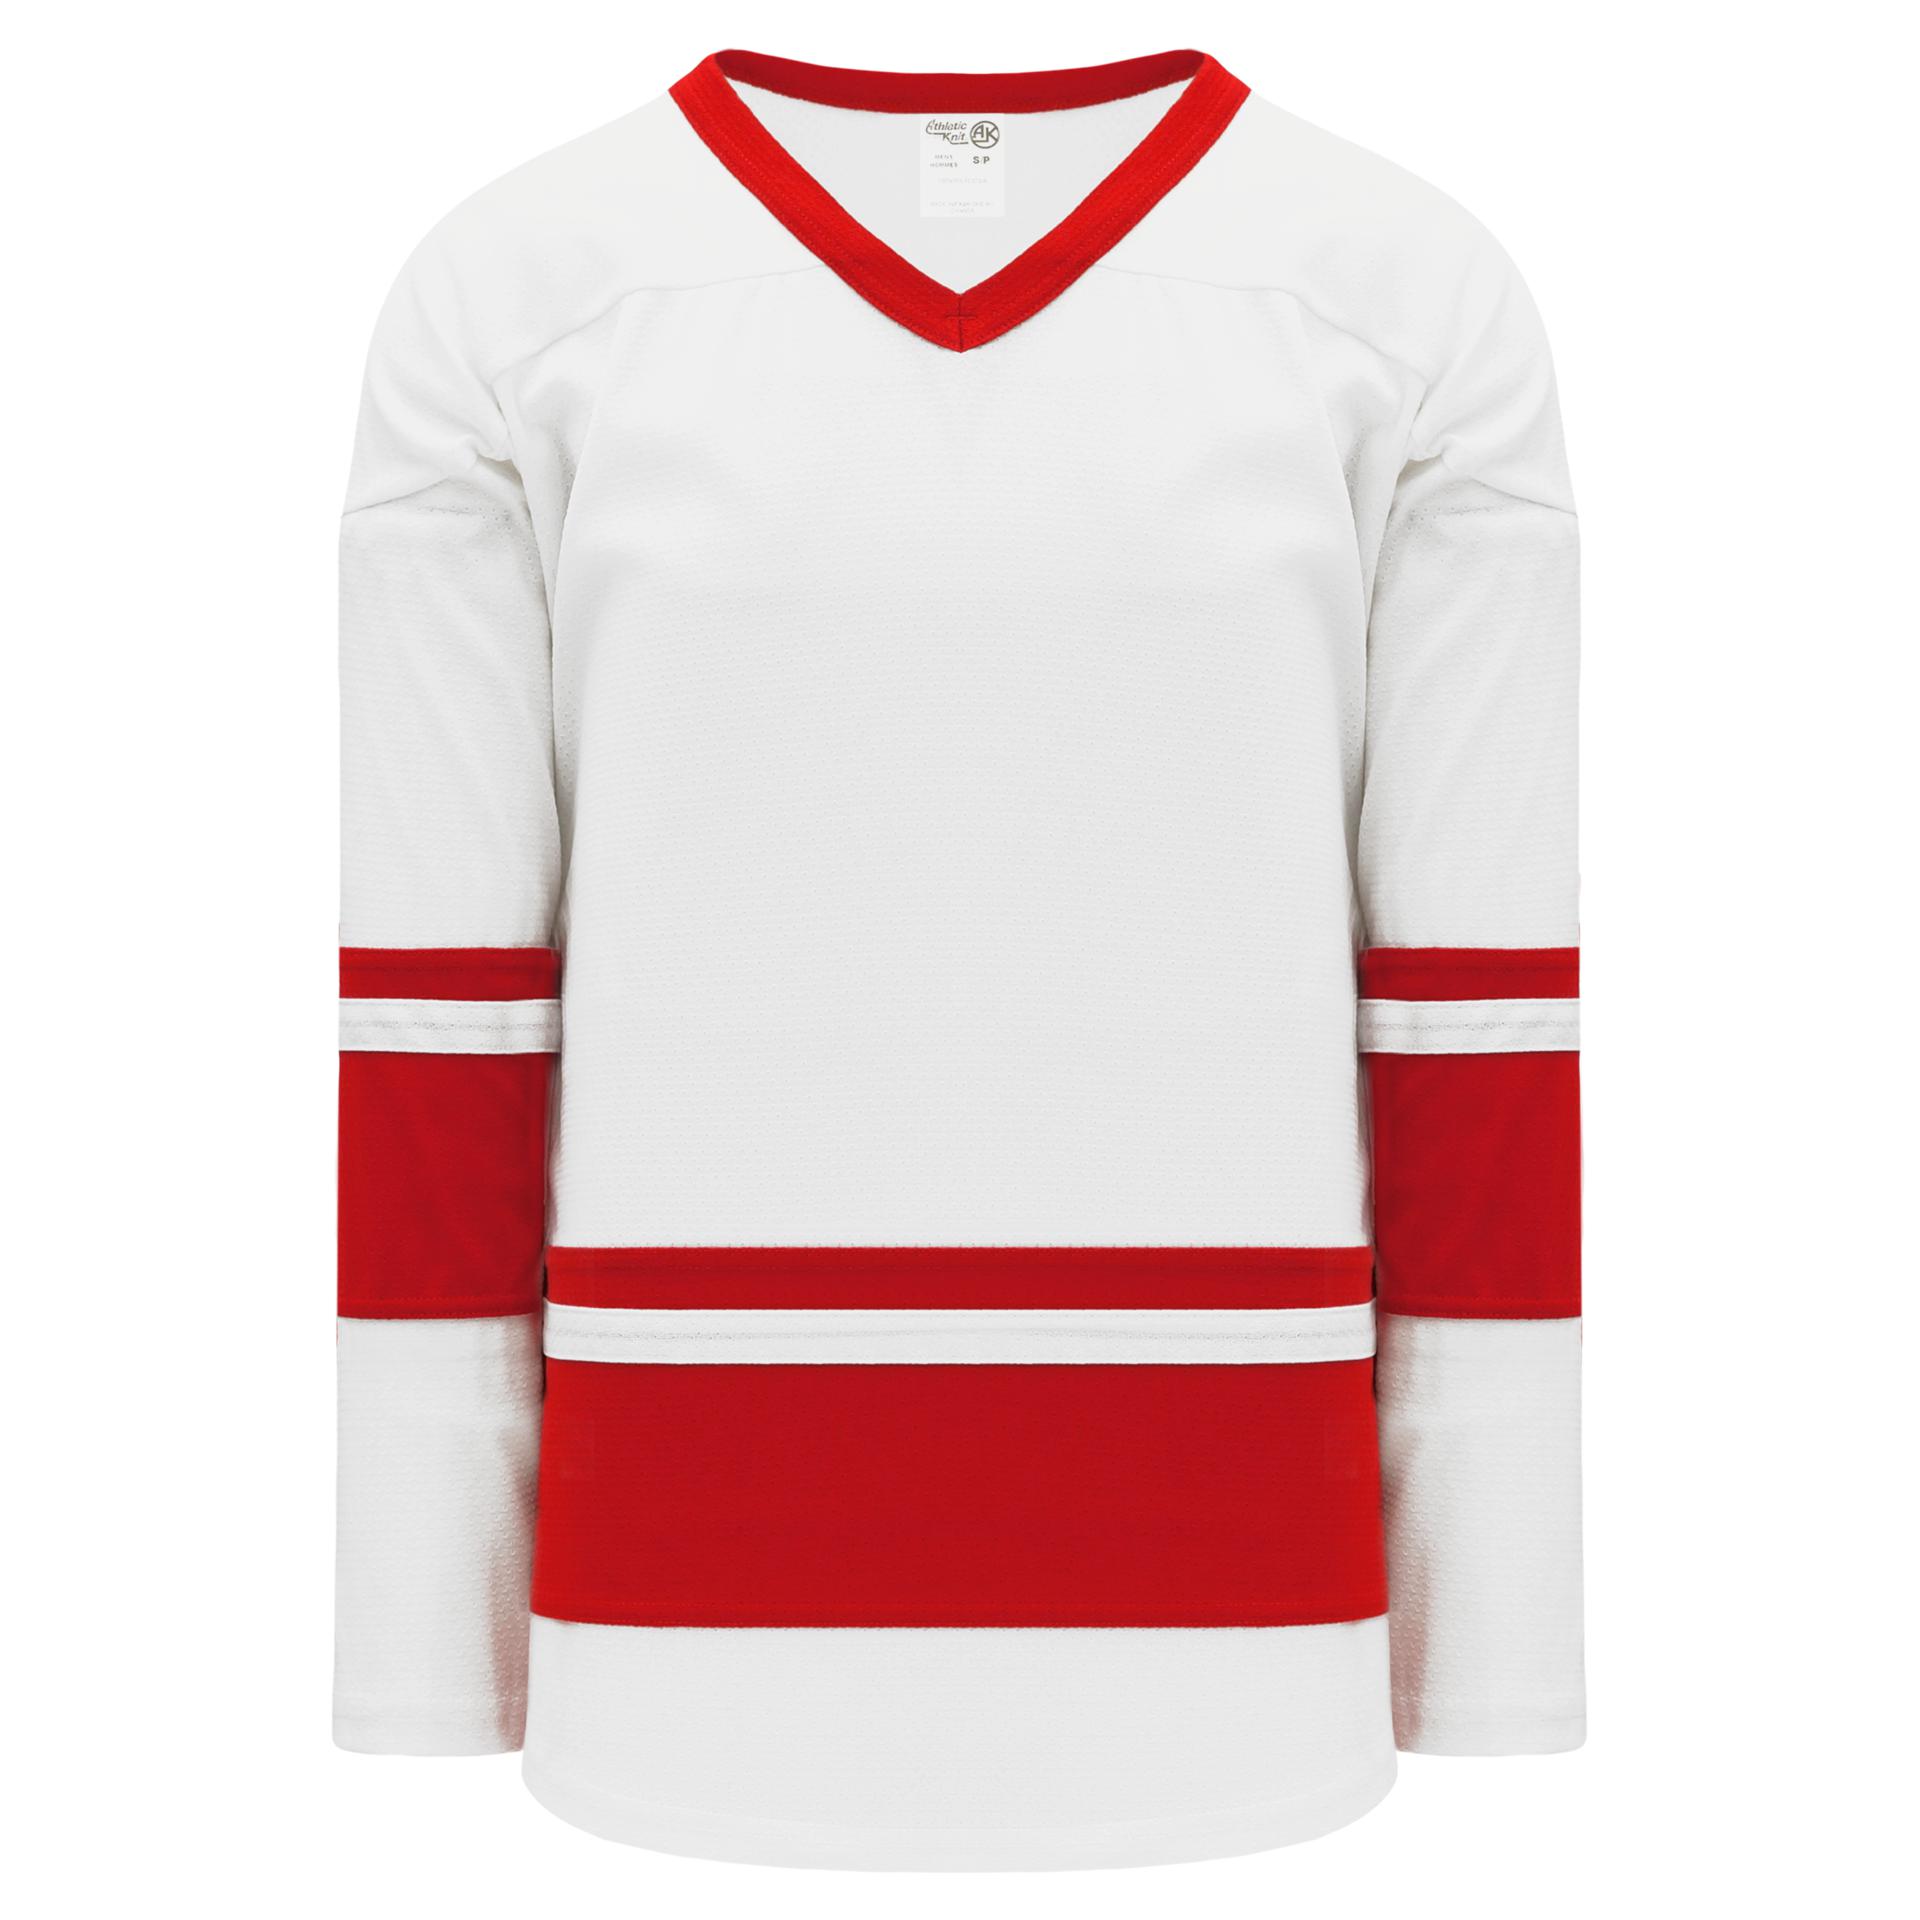 Toronto Red Wings youth XL practice jersey